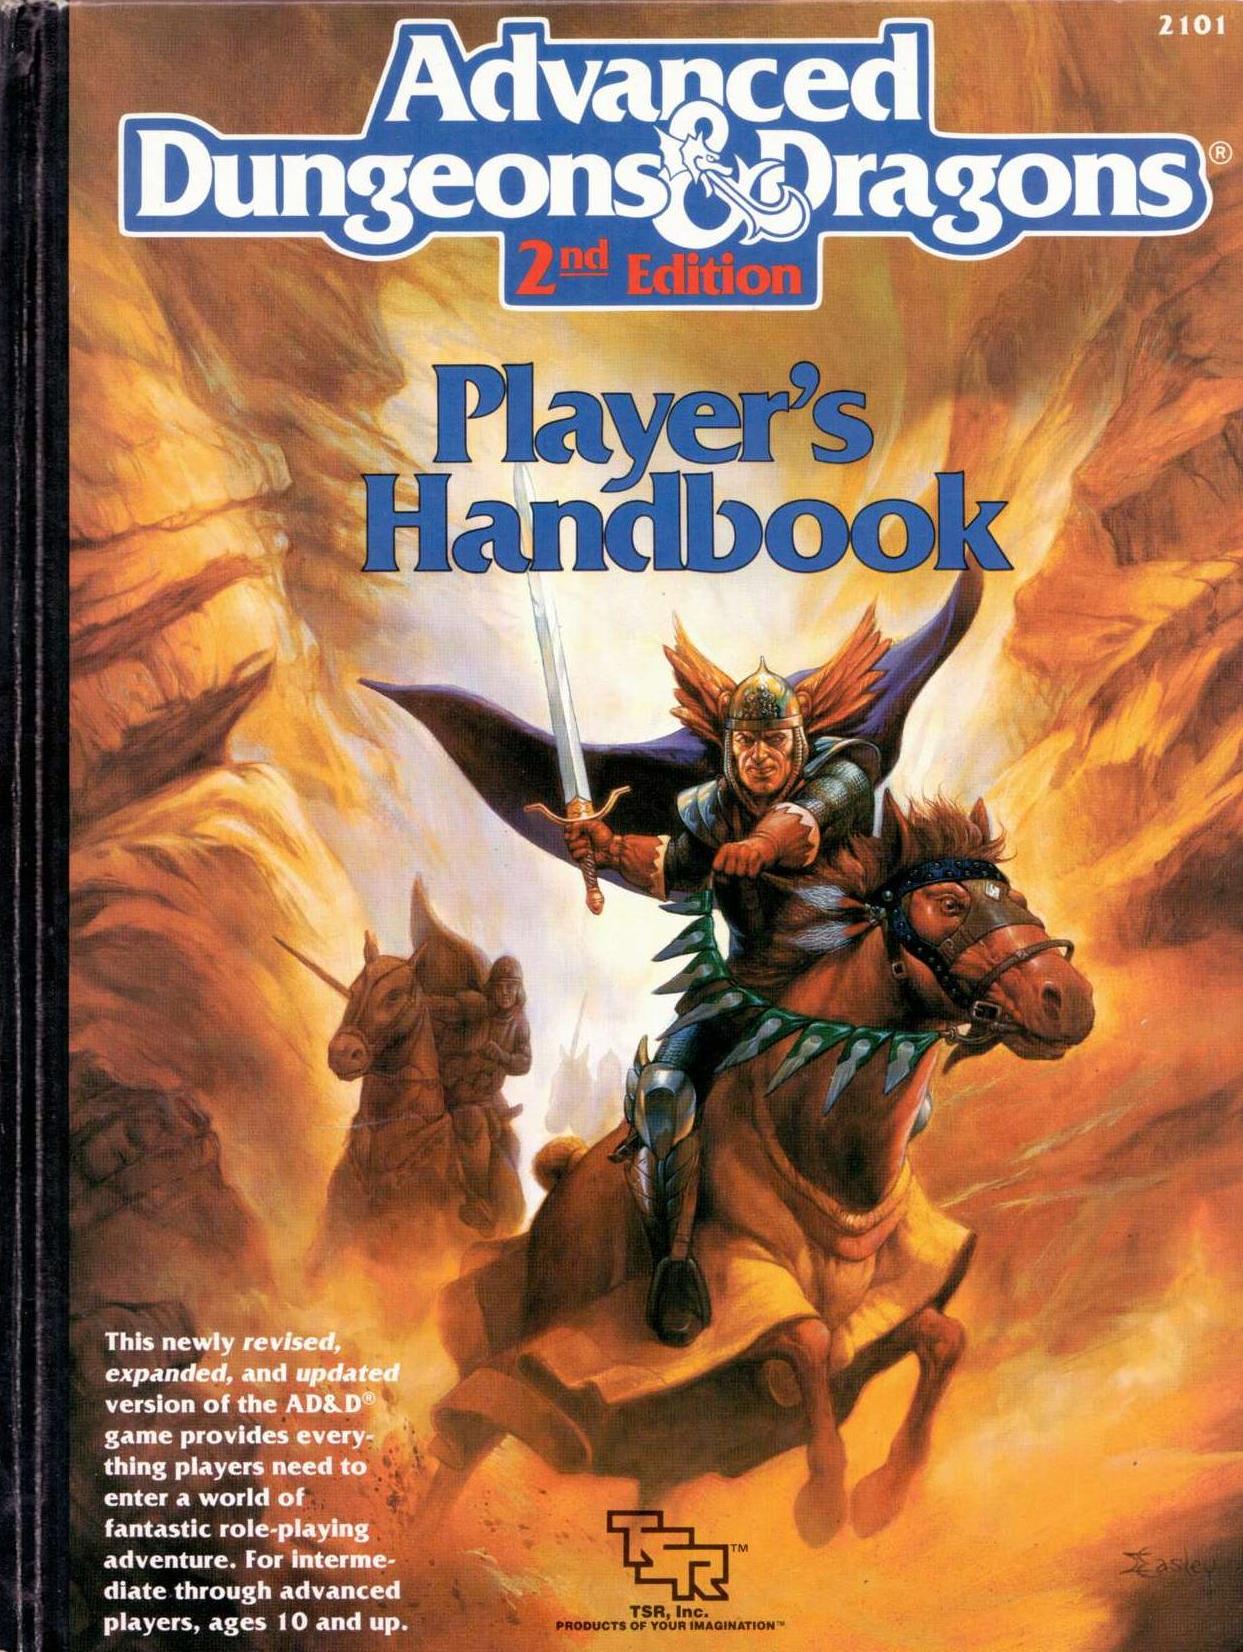  Player's Handbook Dungeons and Dragons 5th Edition